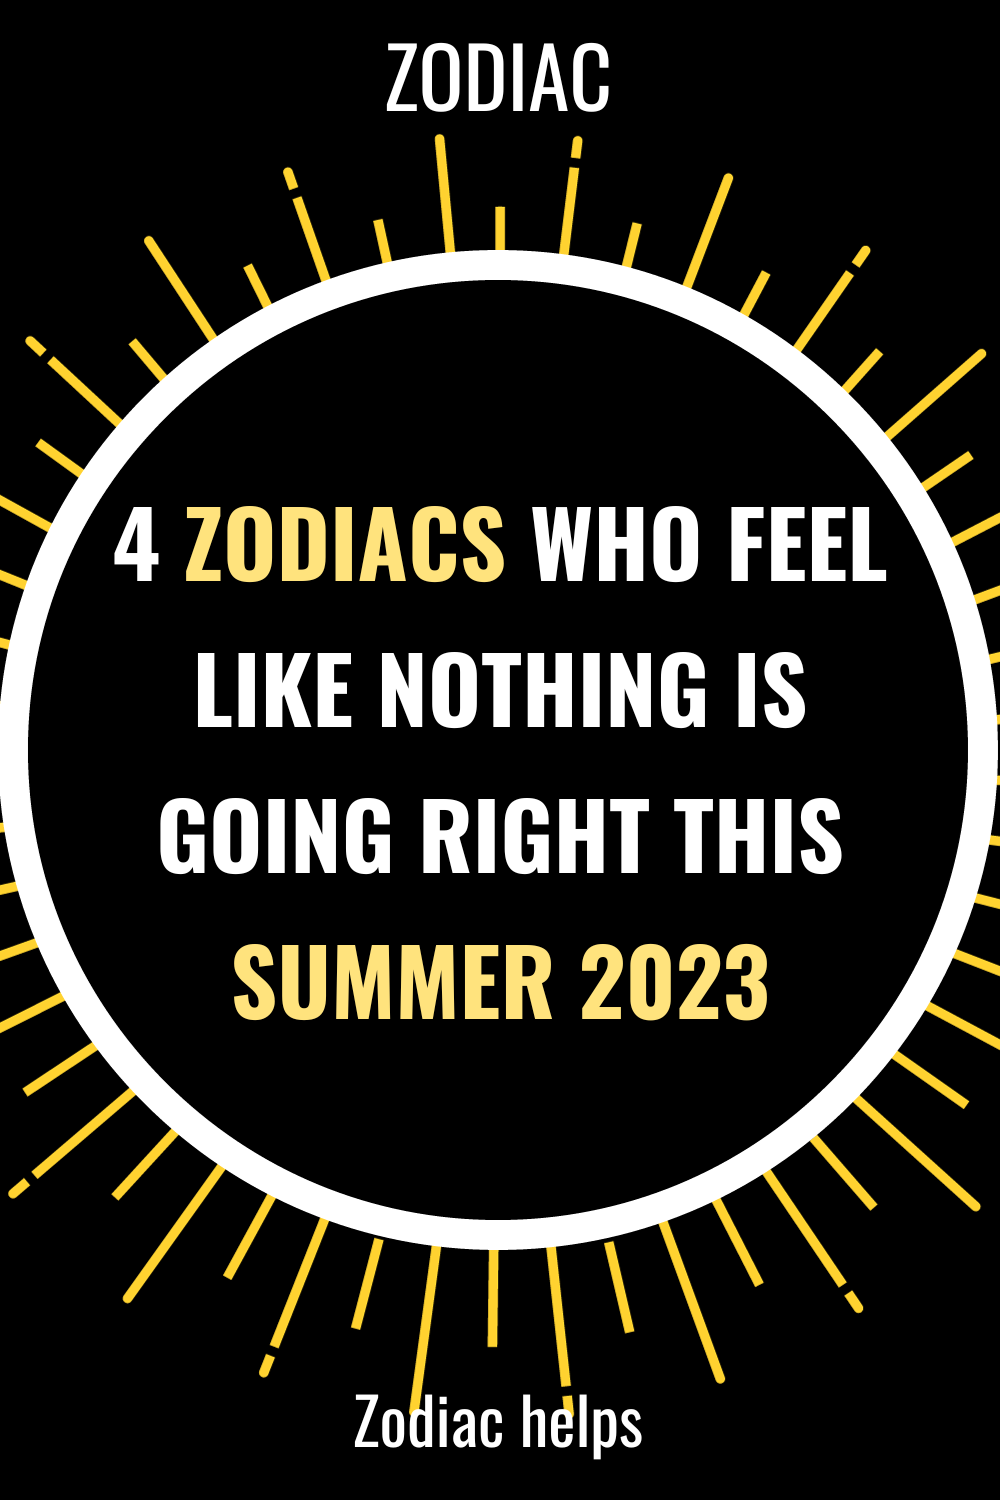 4 Zodiacs Who Feel Like Nothing Is Going Right This Summer 2023